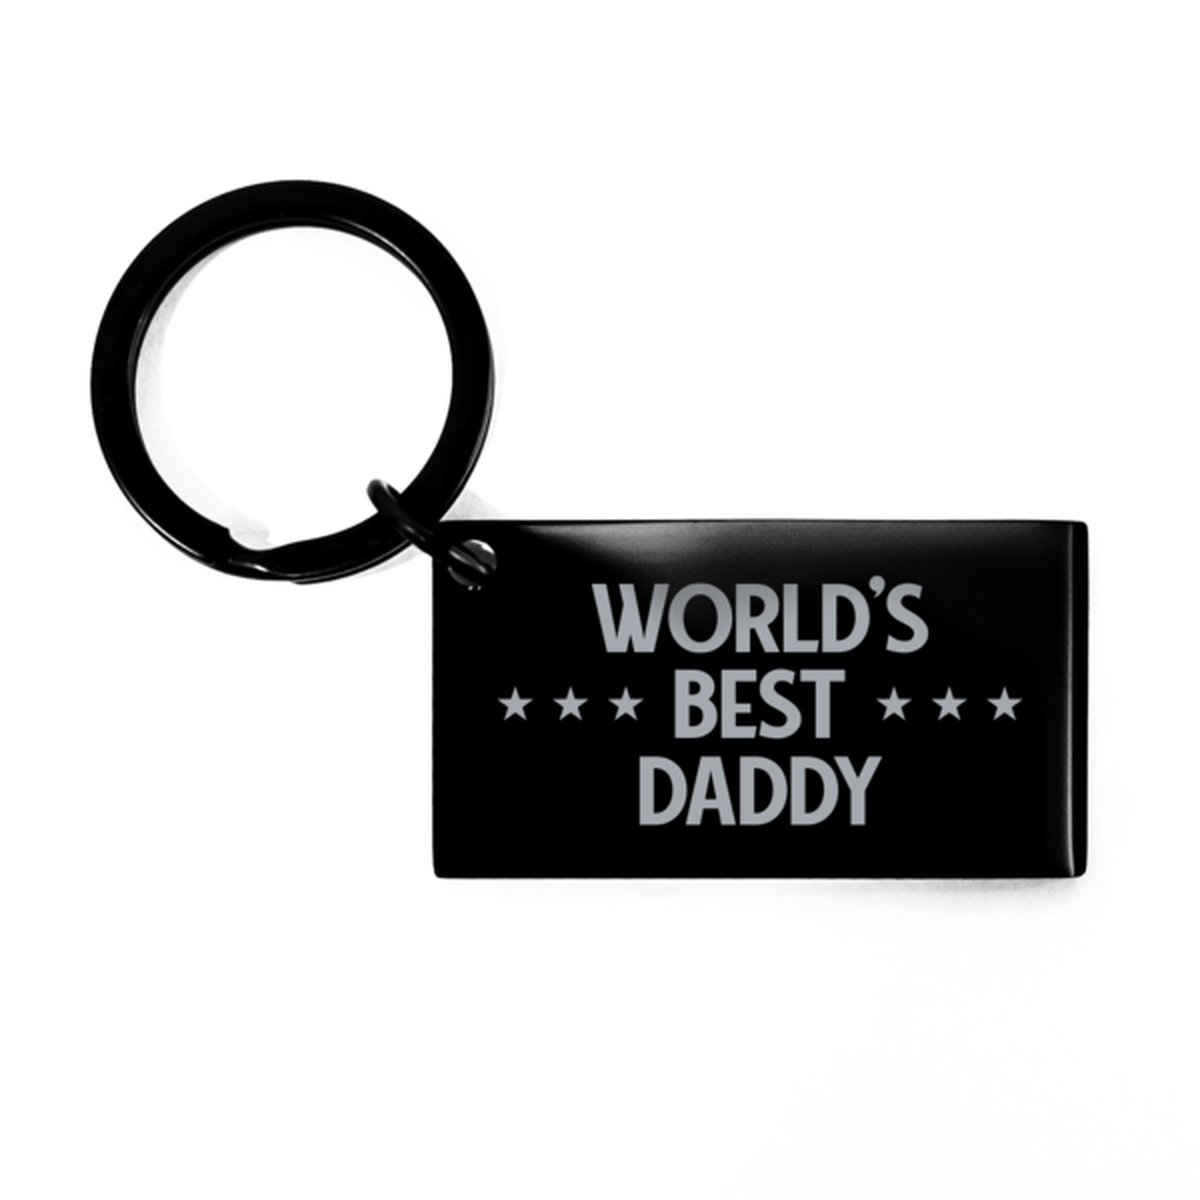 Worlds Best Daddy Gifts, Funny Black Engraved Keychain For Daddy, Birthday Presents For Men